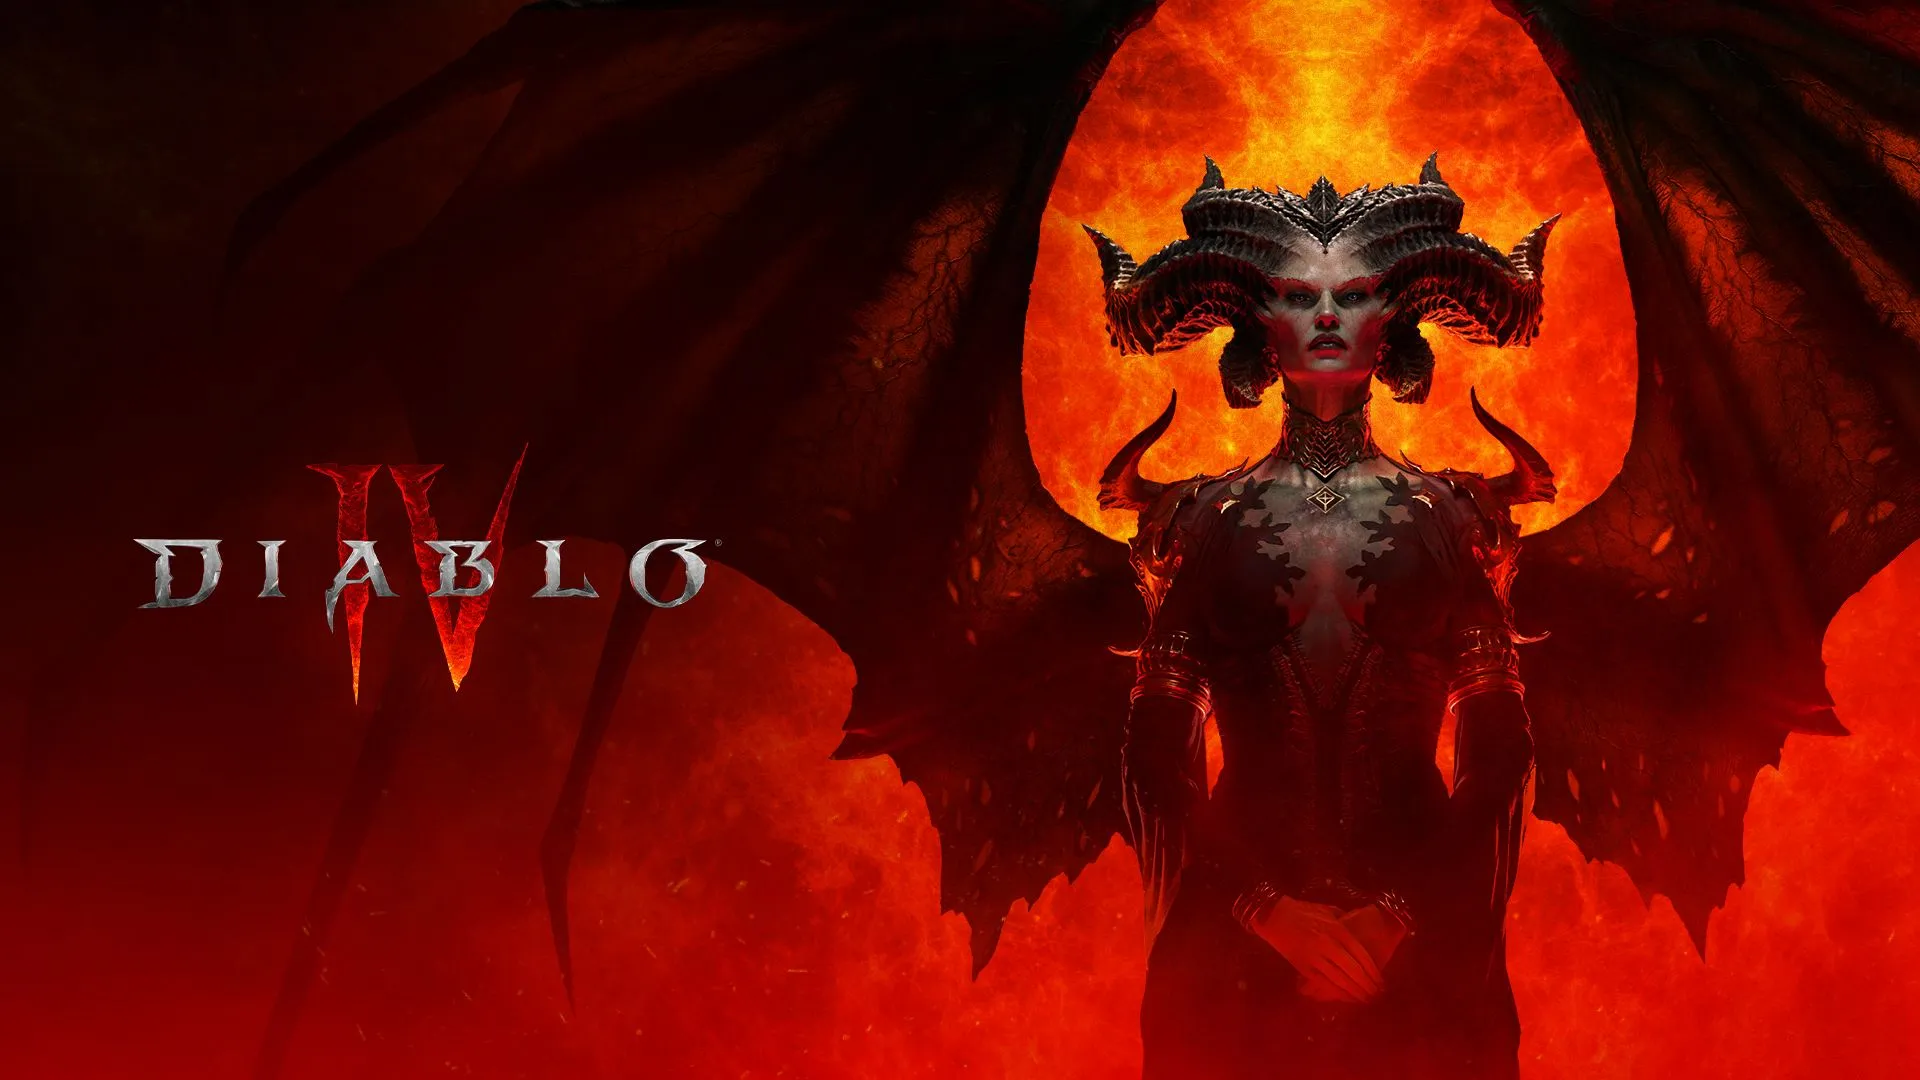 Diablo IV developers confirm that Direct Storage technology is not yet active in the game